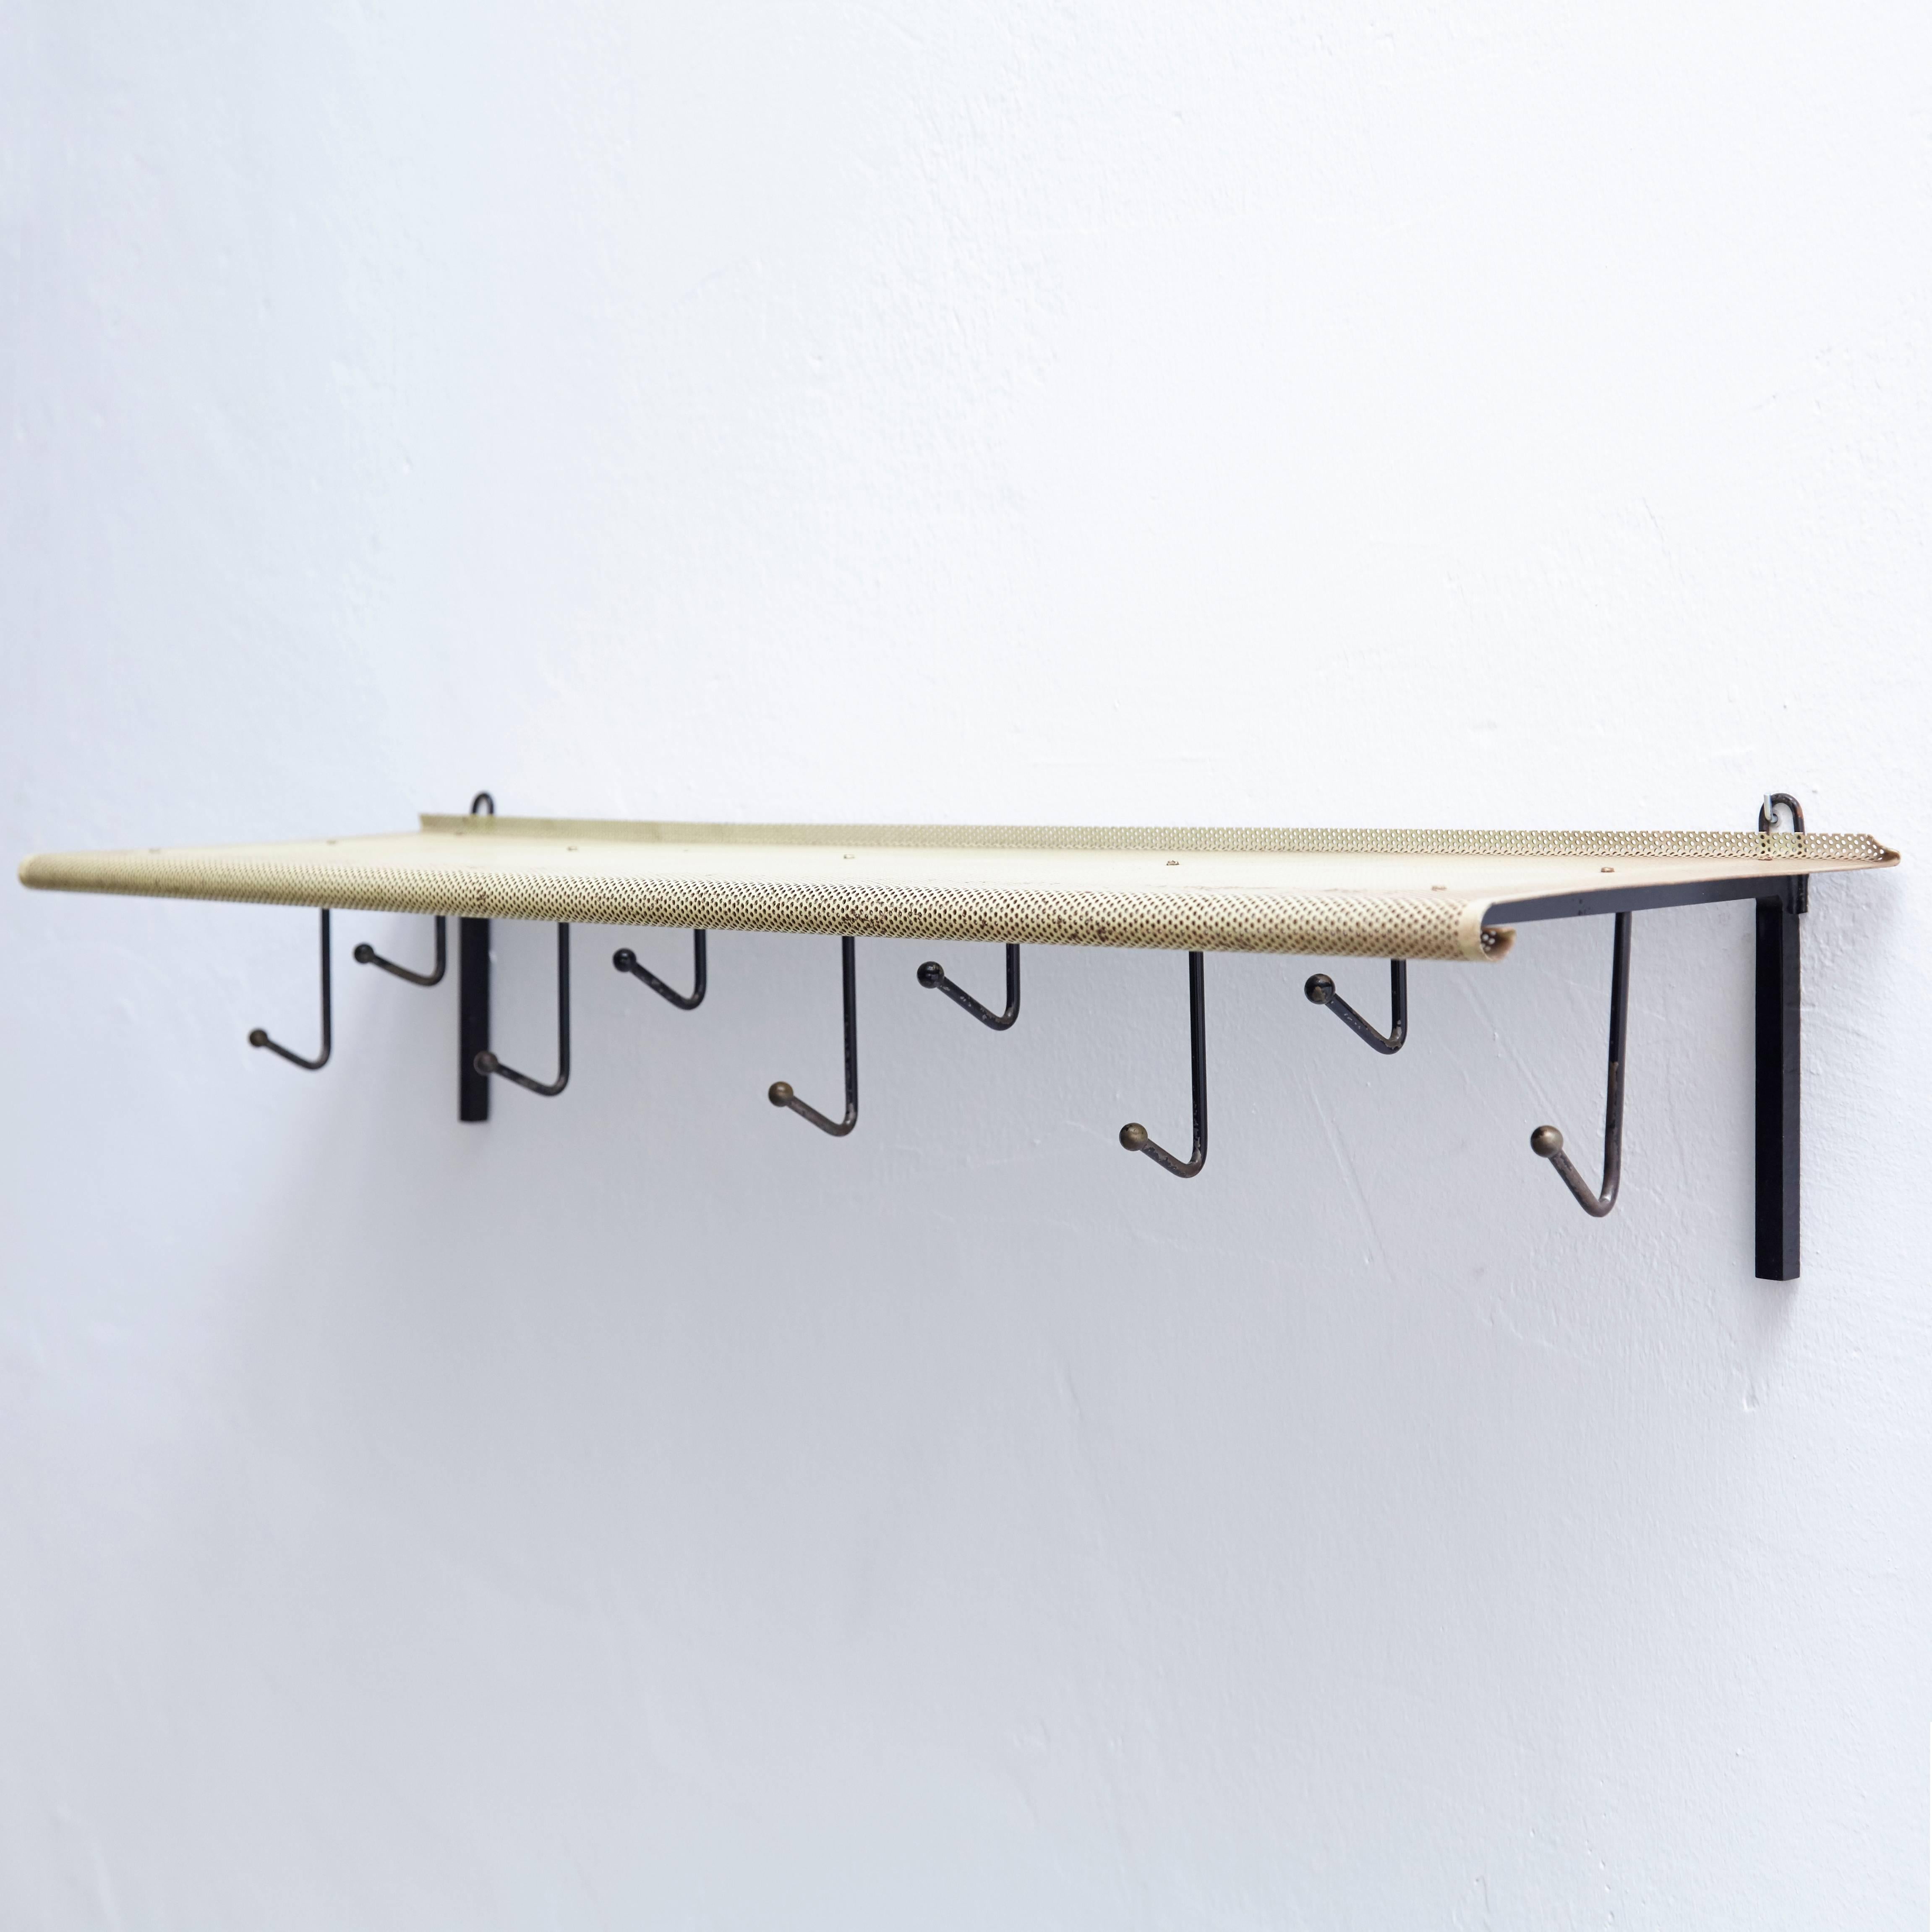 Coat rack designed by Mathieu Matégot.
Manufactured by Artimeta (Netherland), circa 1940.
Perforated, lacquered metal.

In good original condition, with minor wear consistent with age and use, preserving a beautiful patina.

Mathieu Matégot